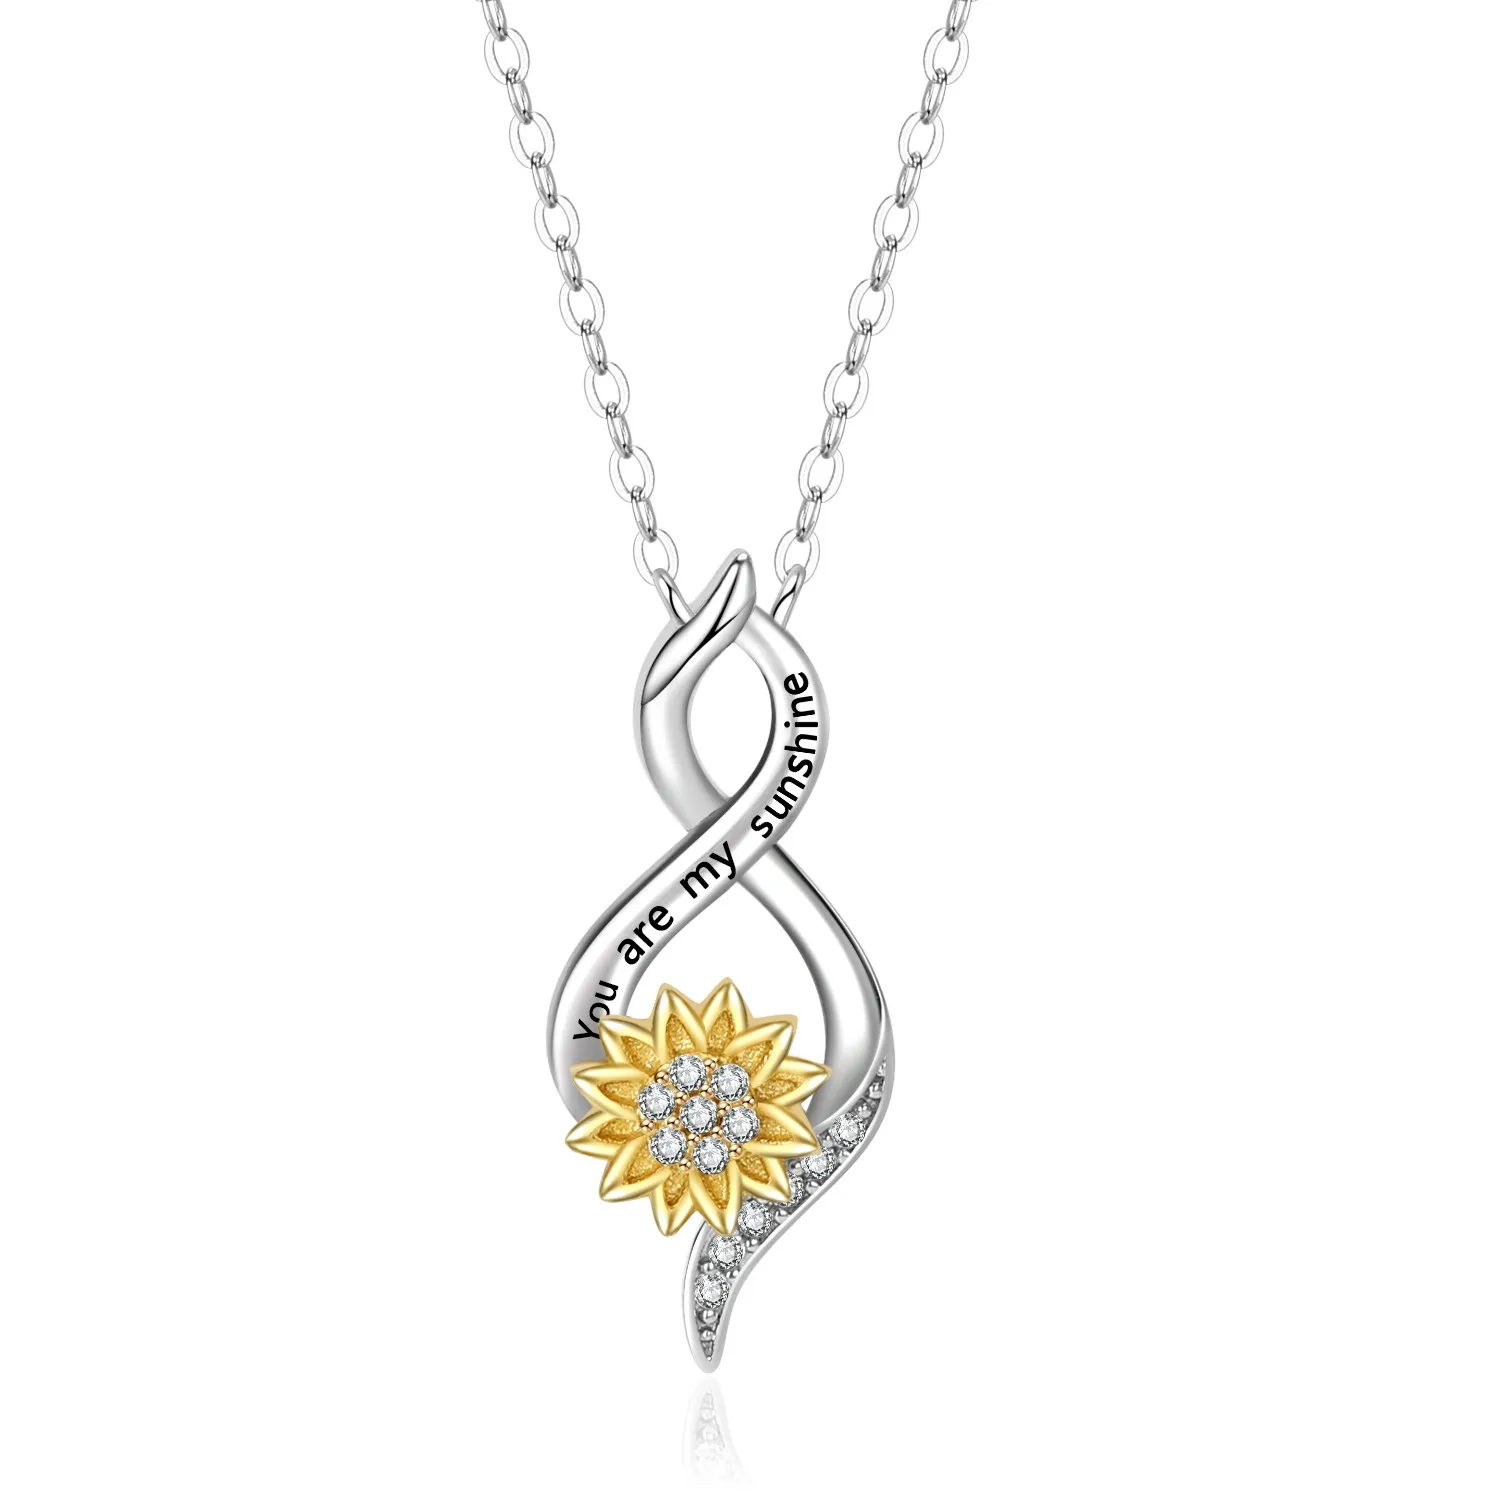 

Slovehoony 925 Sterling Sliver You Are My Sunshine Necklace Infinity Spinning Sunflower Anxiety Necklace For Women